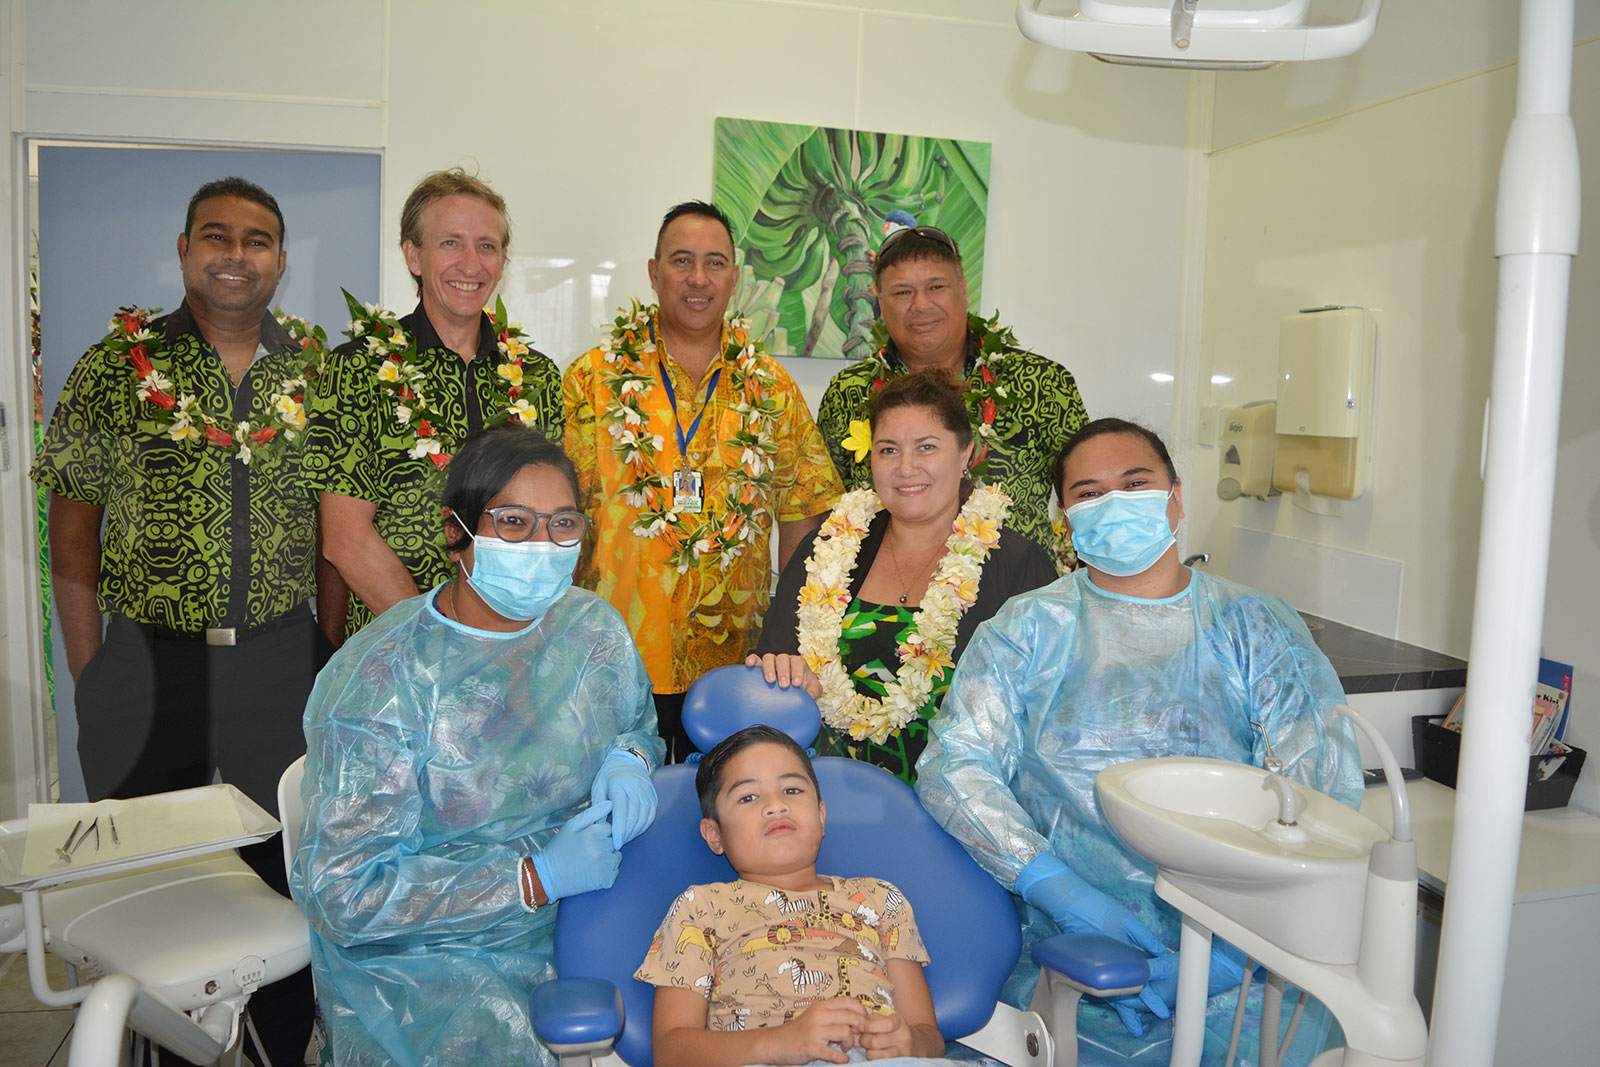 Children’s dental clinic – first of its kind in the Cook Islands